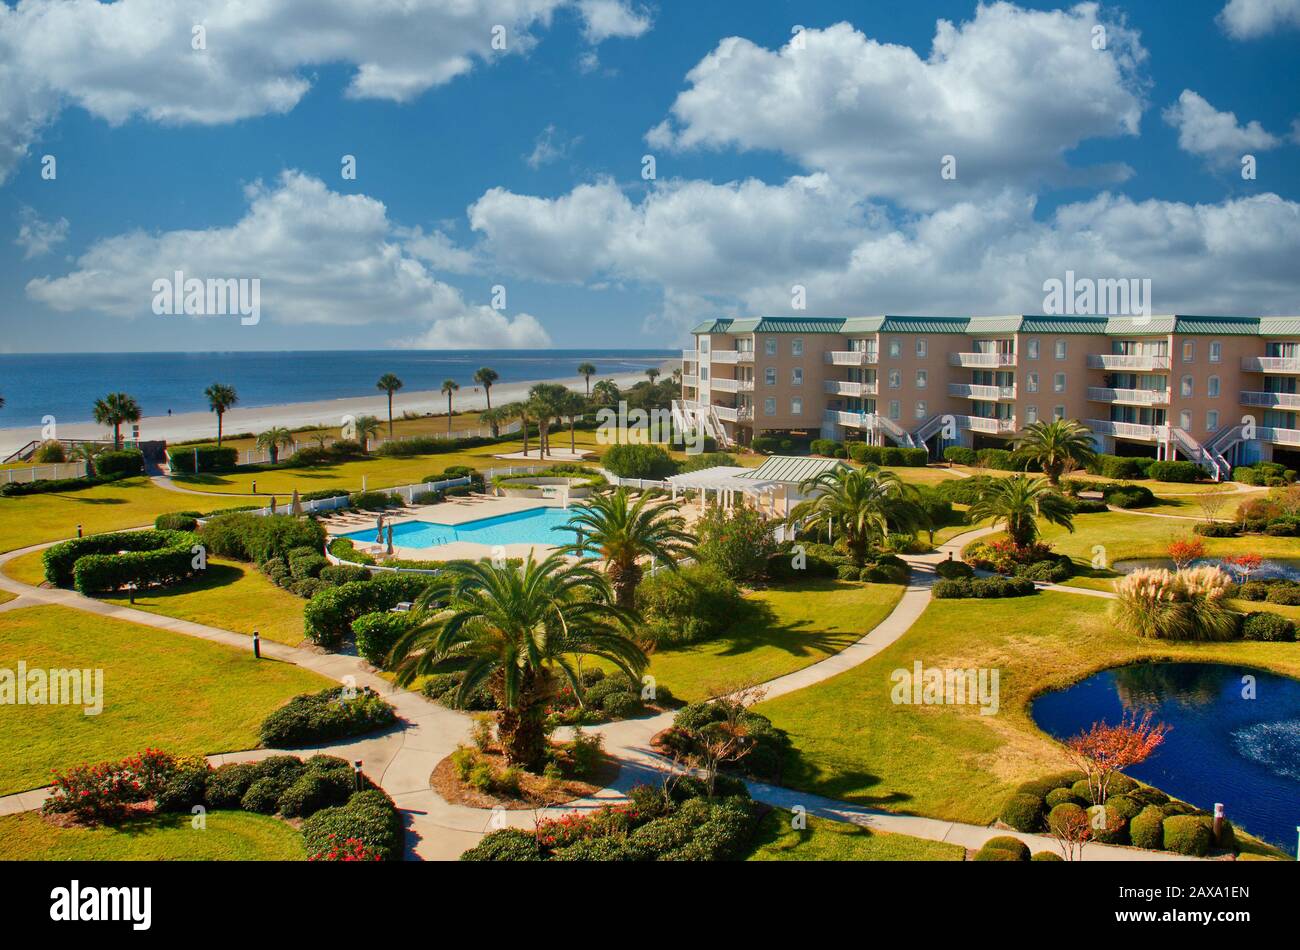 Swimming Pool and Grounds at a Beachside Condo Stock Photo